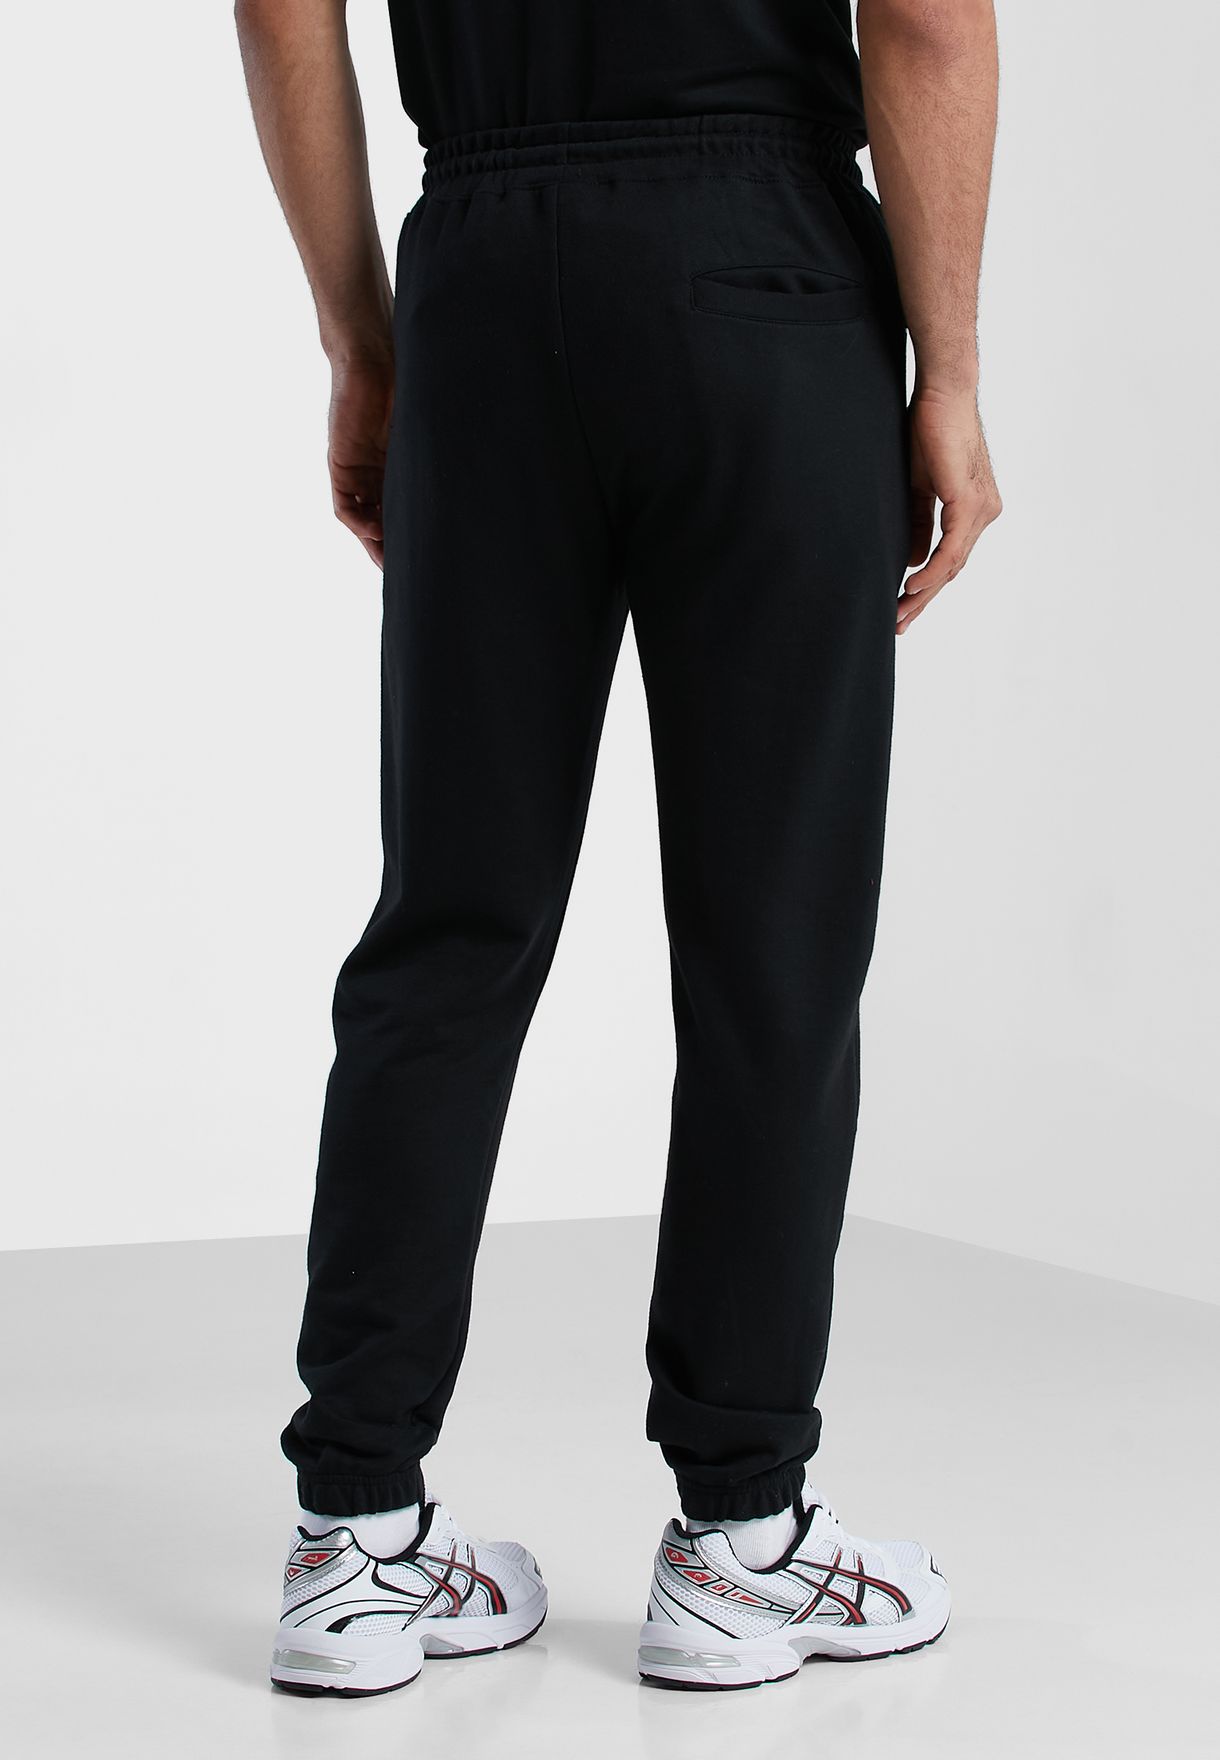 Athleisure Essential Joggers